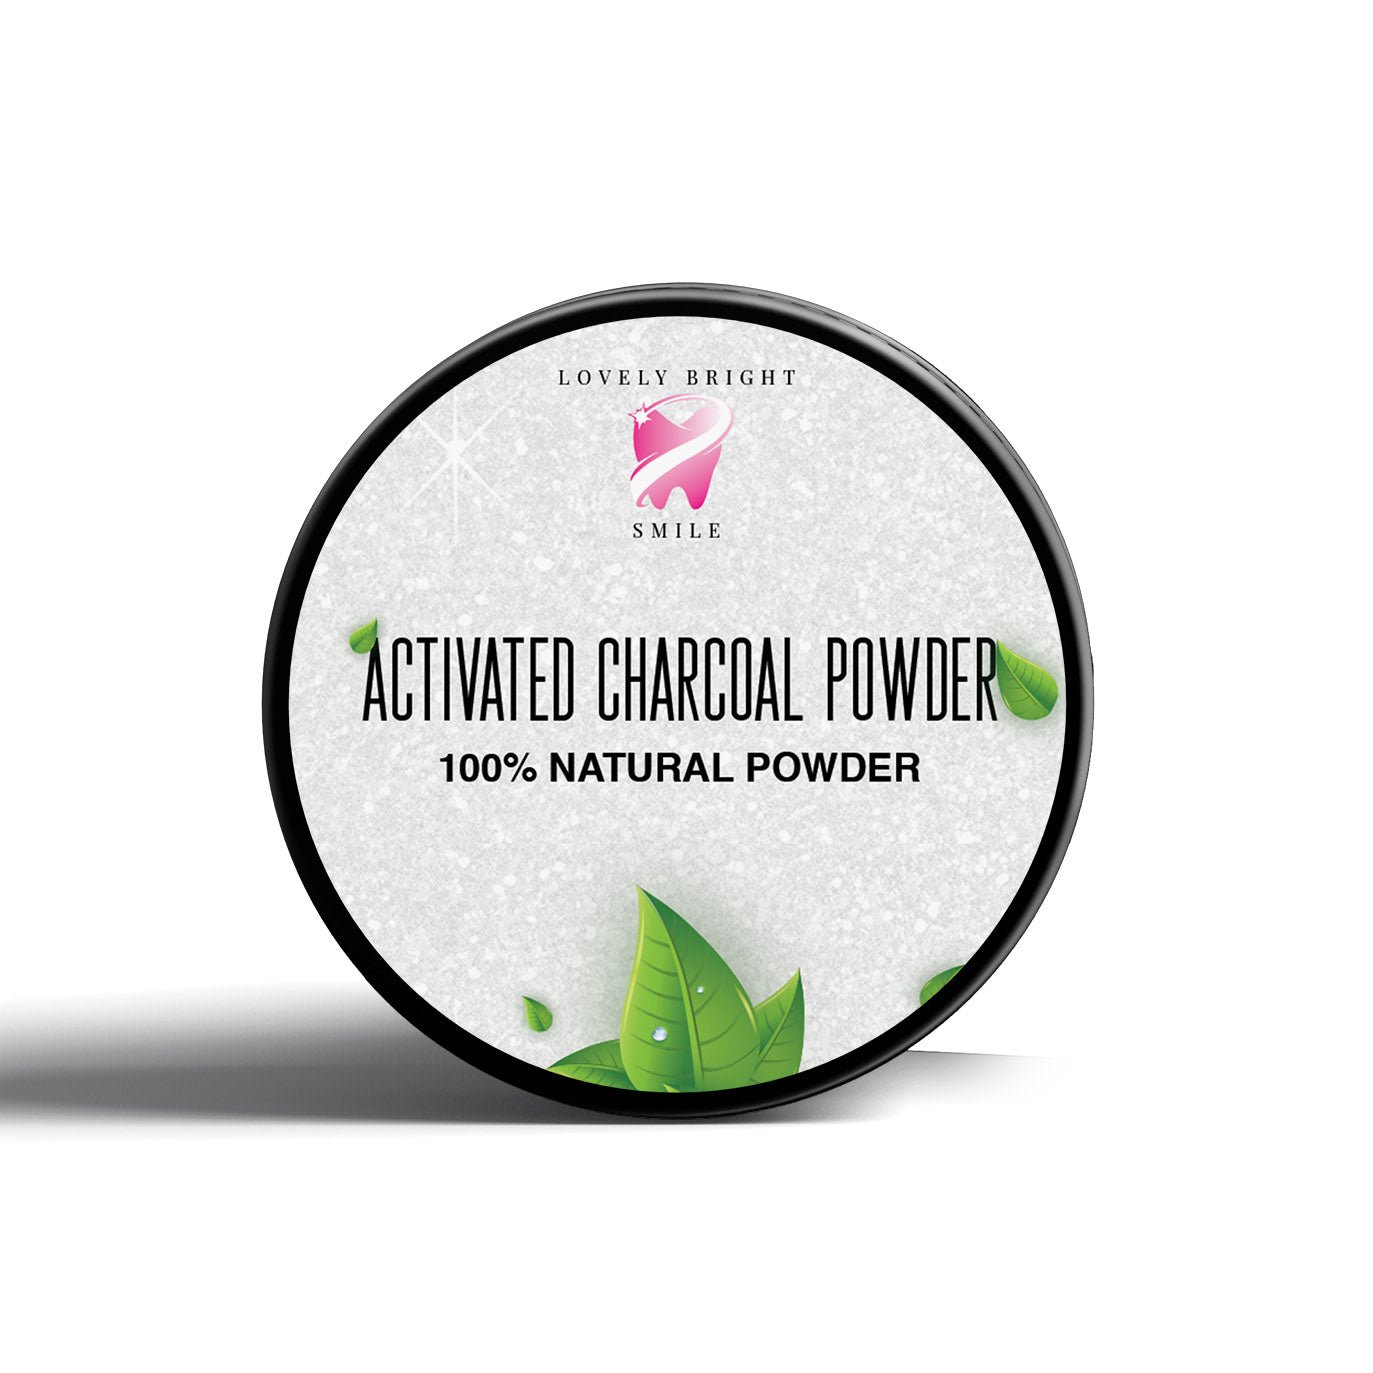 Mint Activated Charcoal Teeth Whitening Powder | Lovely Bright Smile